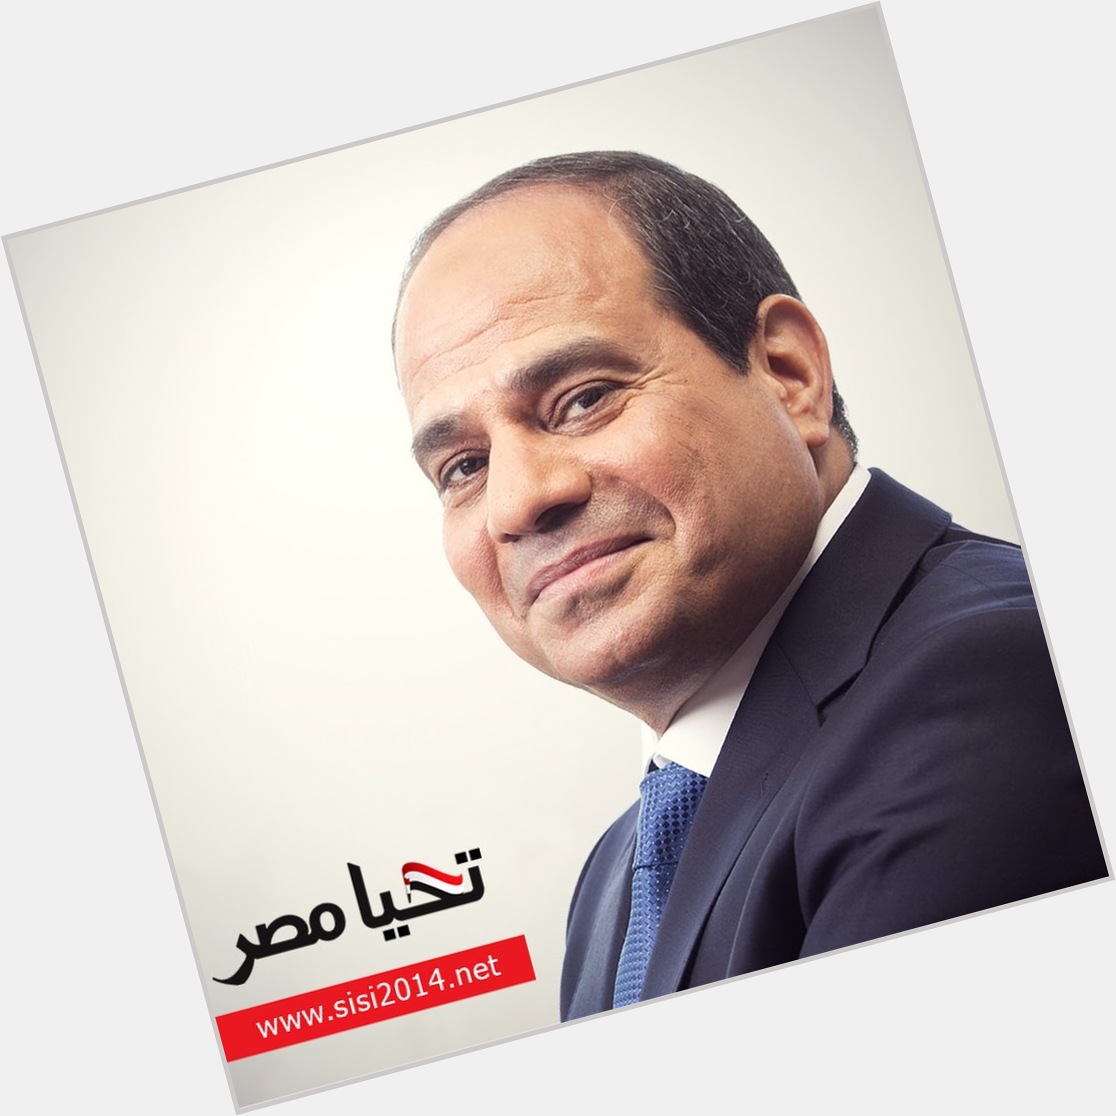 Youssef Elsisi new pic 1